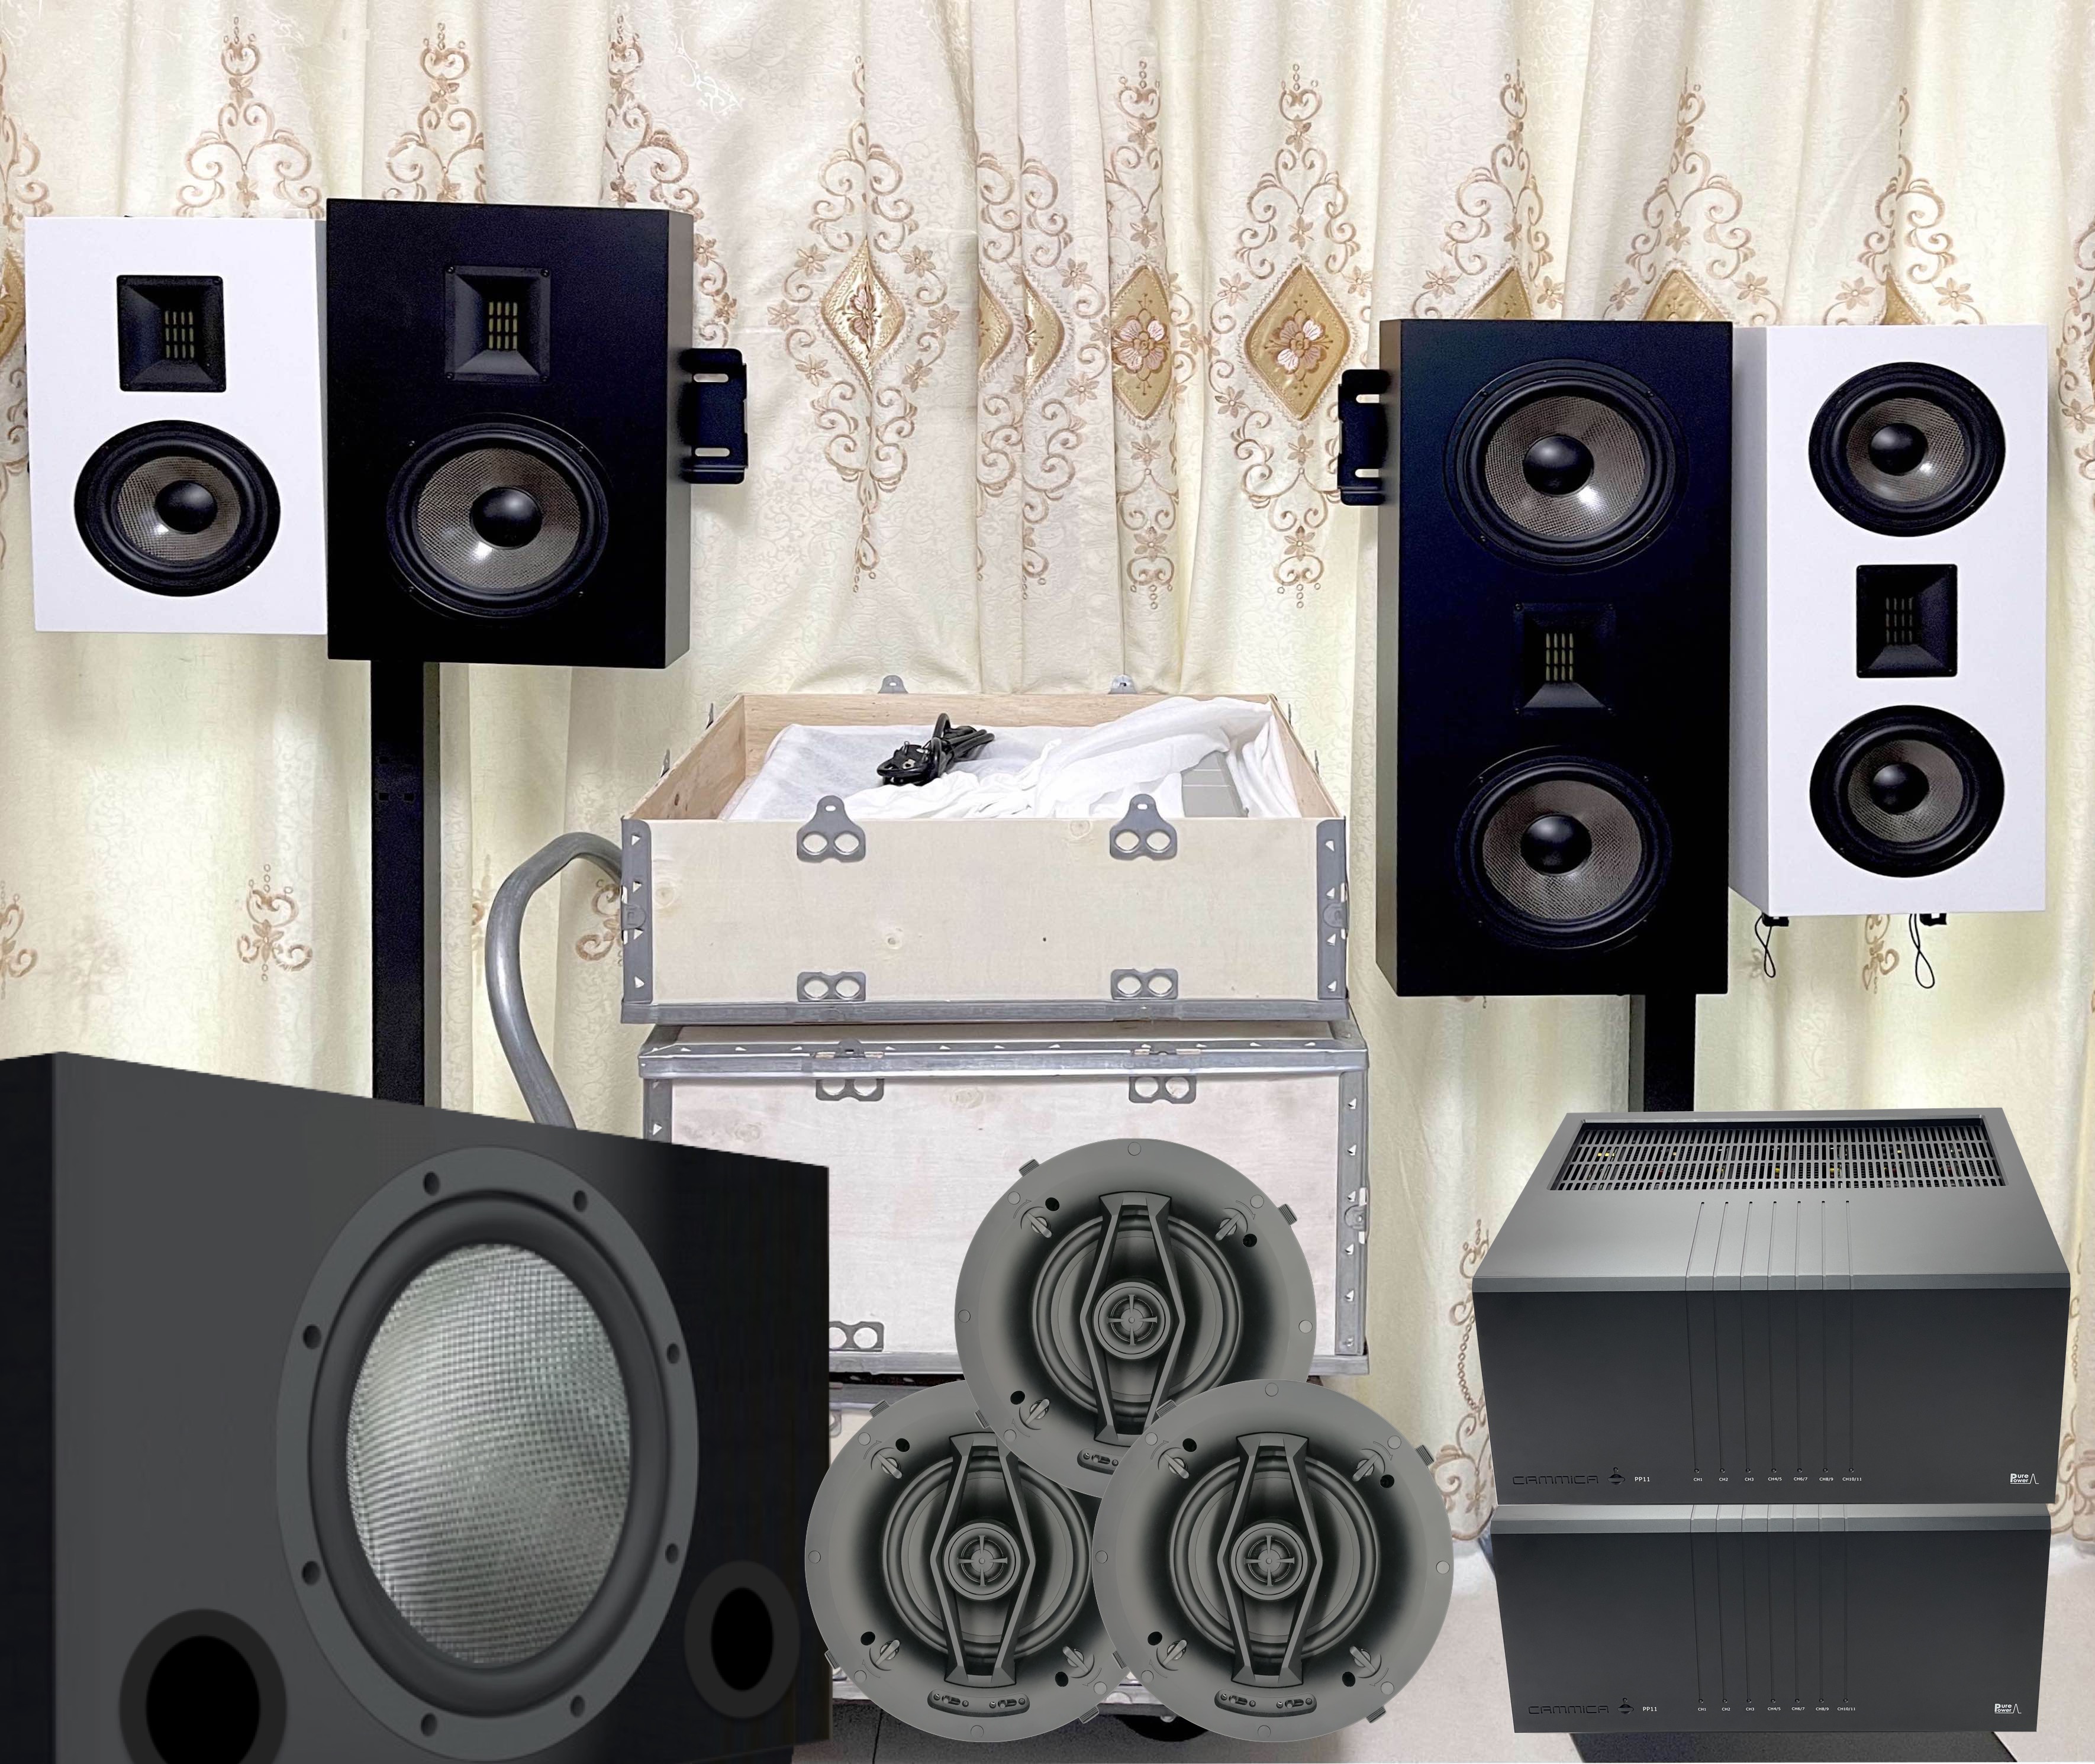  Have you got all the home theater sound field solutions?